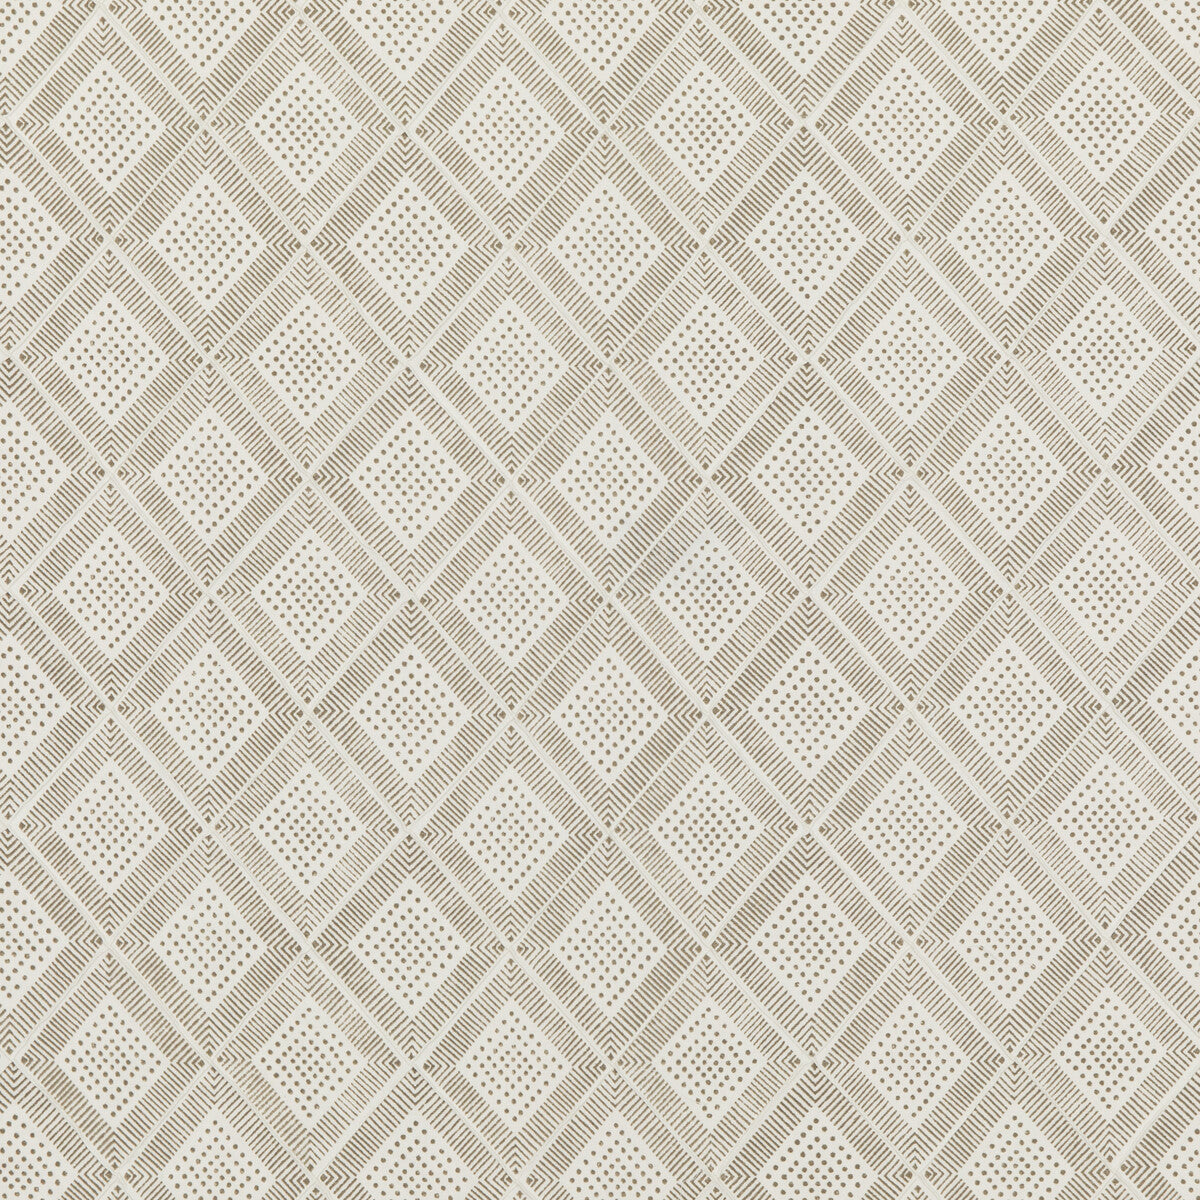 Block Trellis fabric in stone color - pattern PP50484.4.0 - by Baker Lifestyle in the Block Party collection